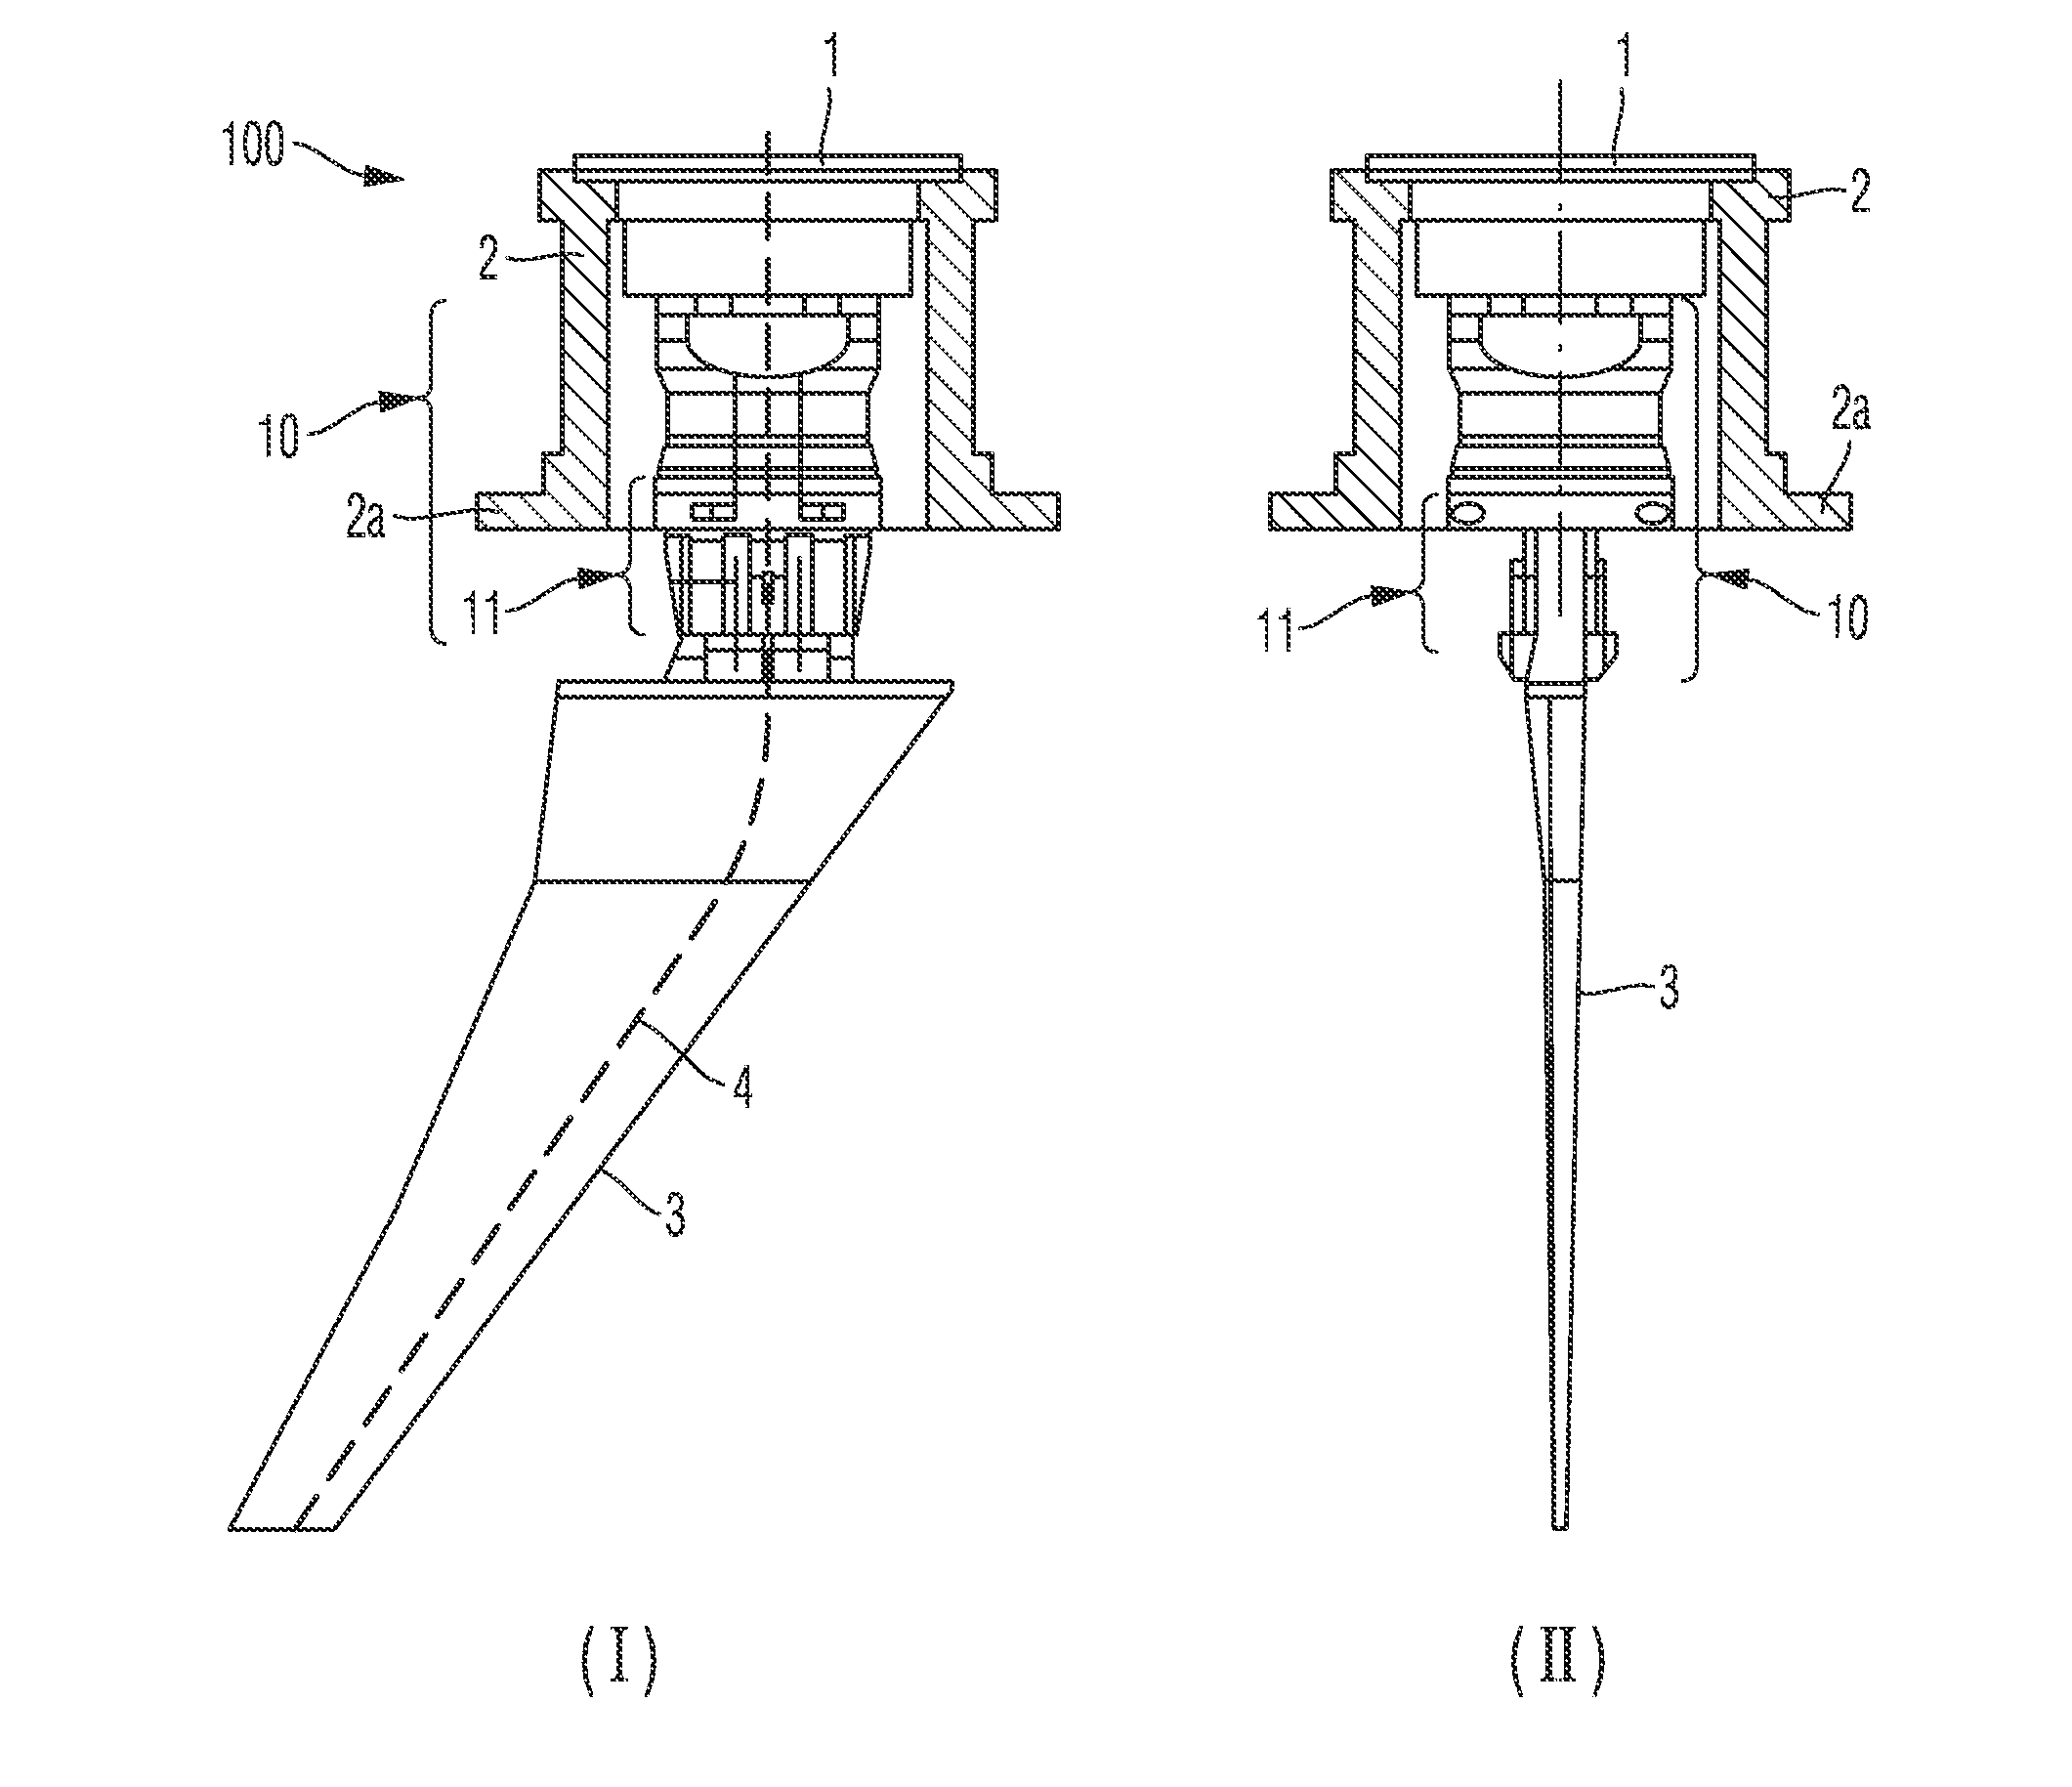 Wind tunnel balance and system with wing model and wind tunnel balance